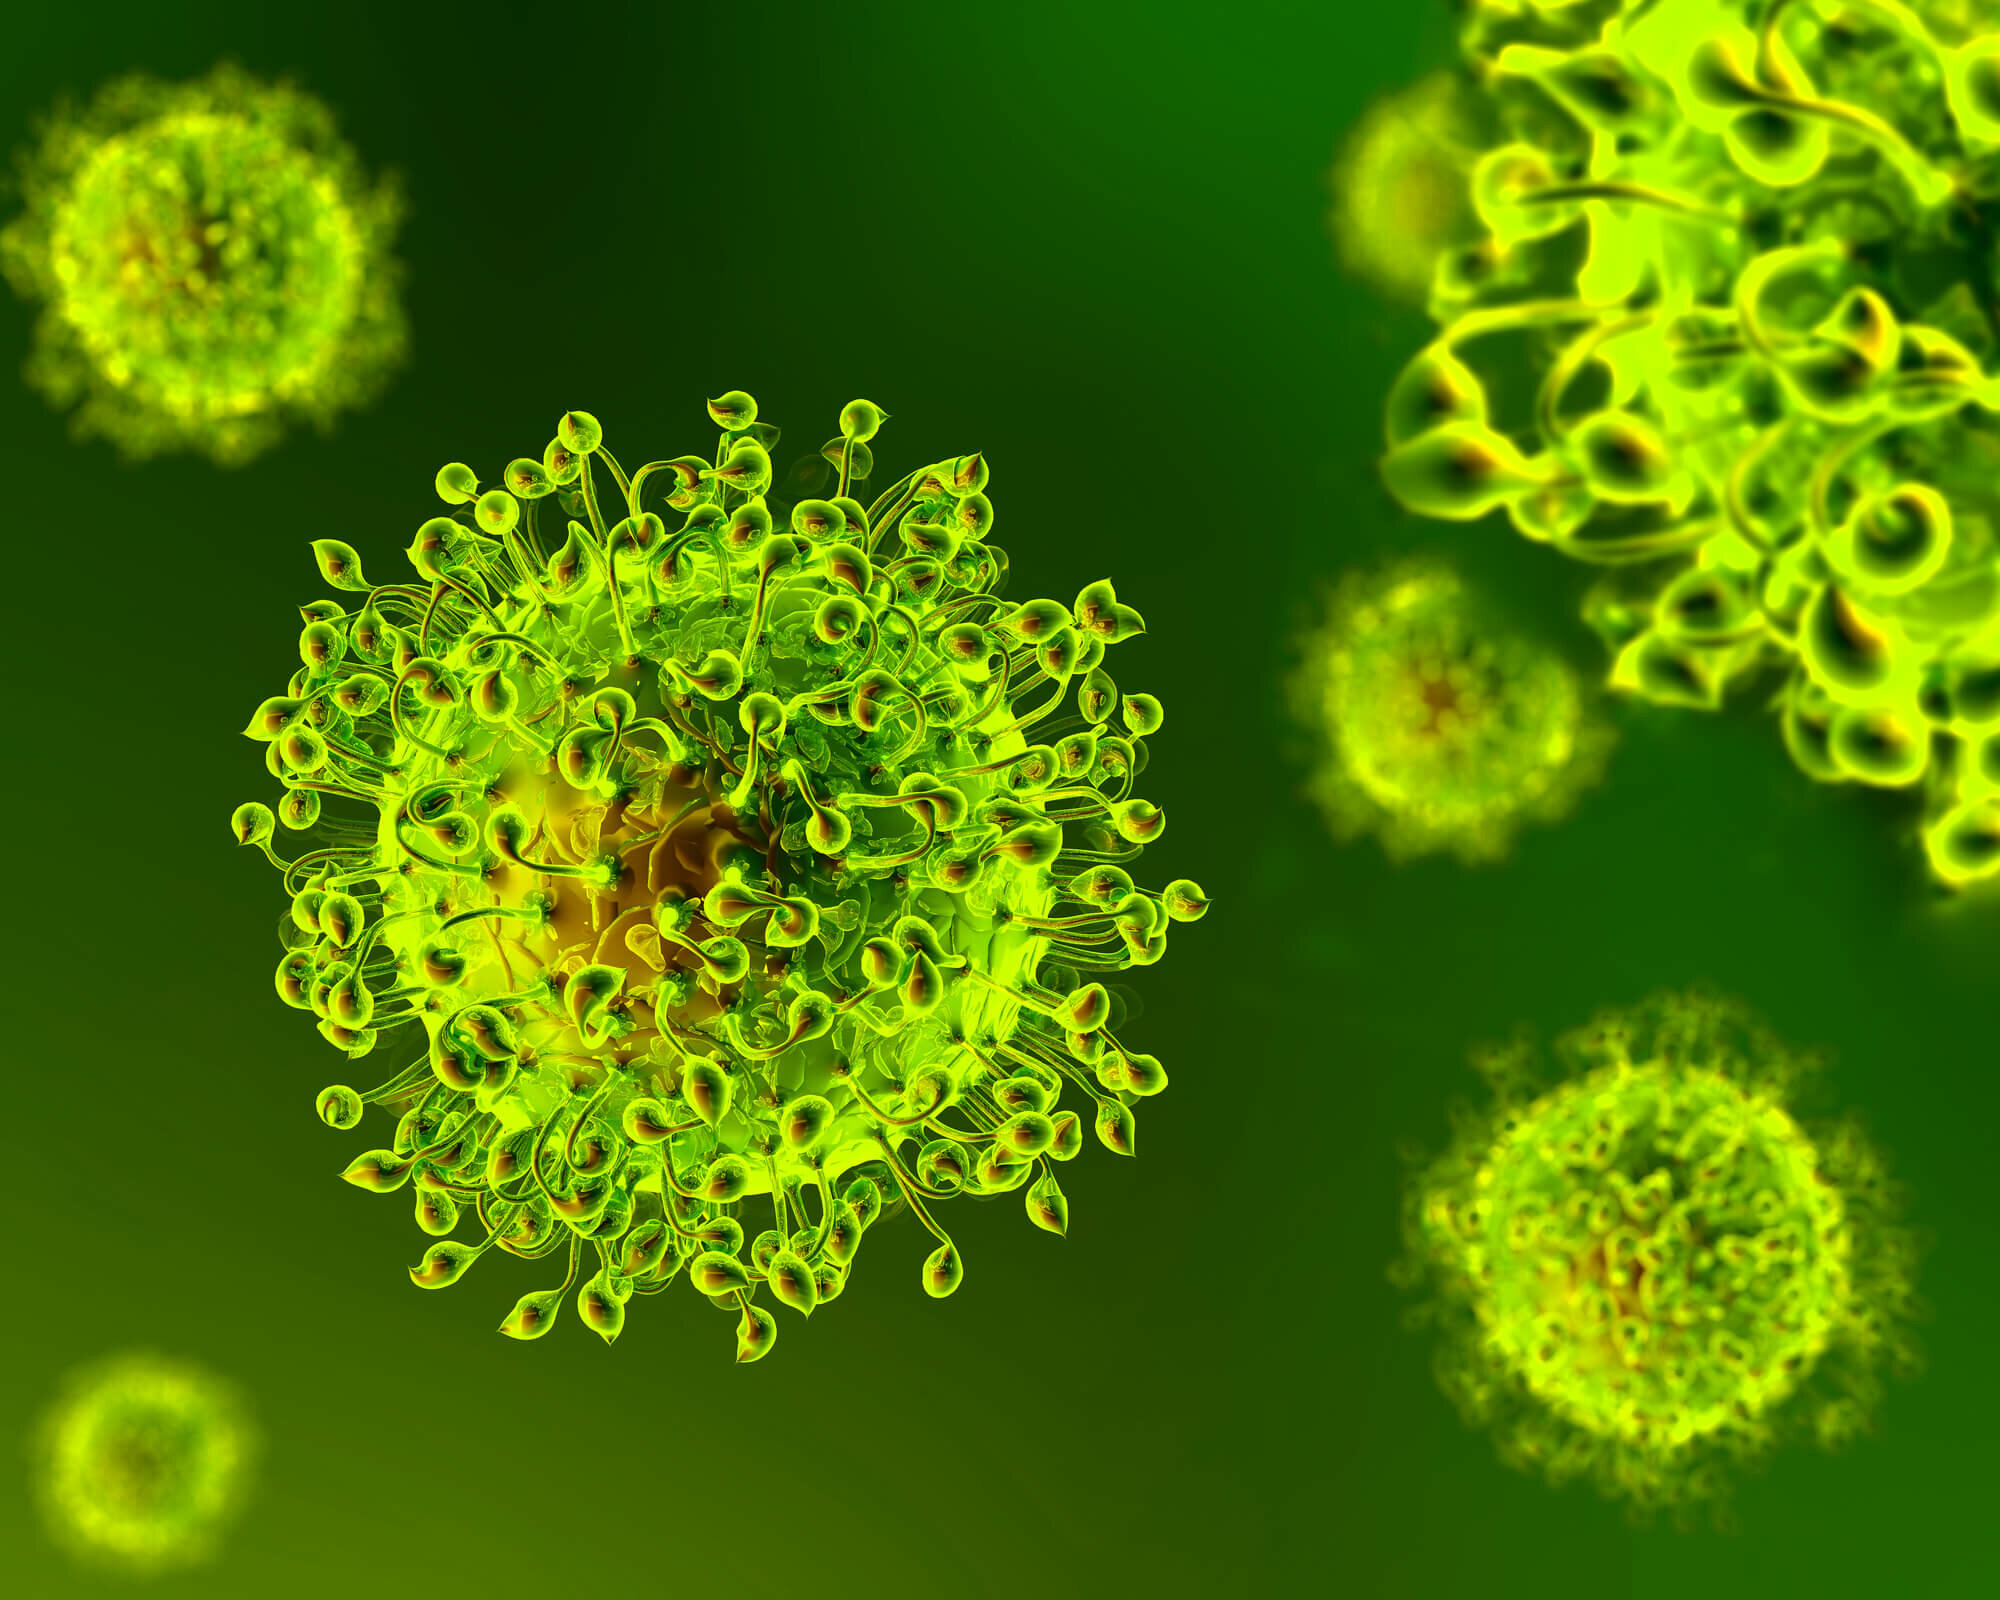 COVID-19 virus impacts personal injury claims